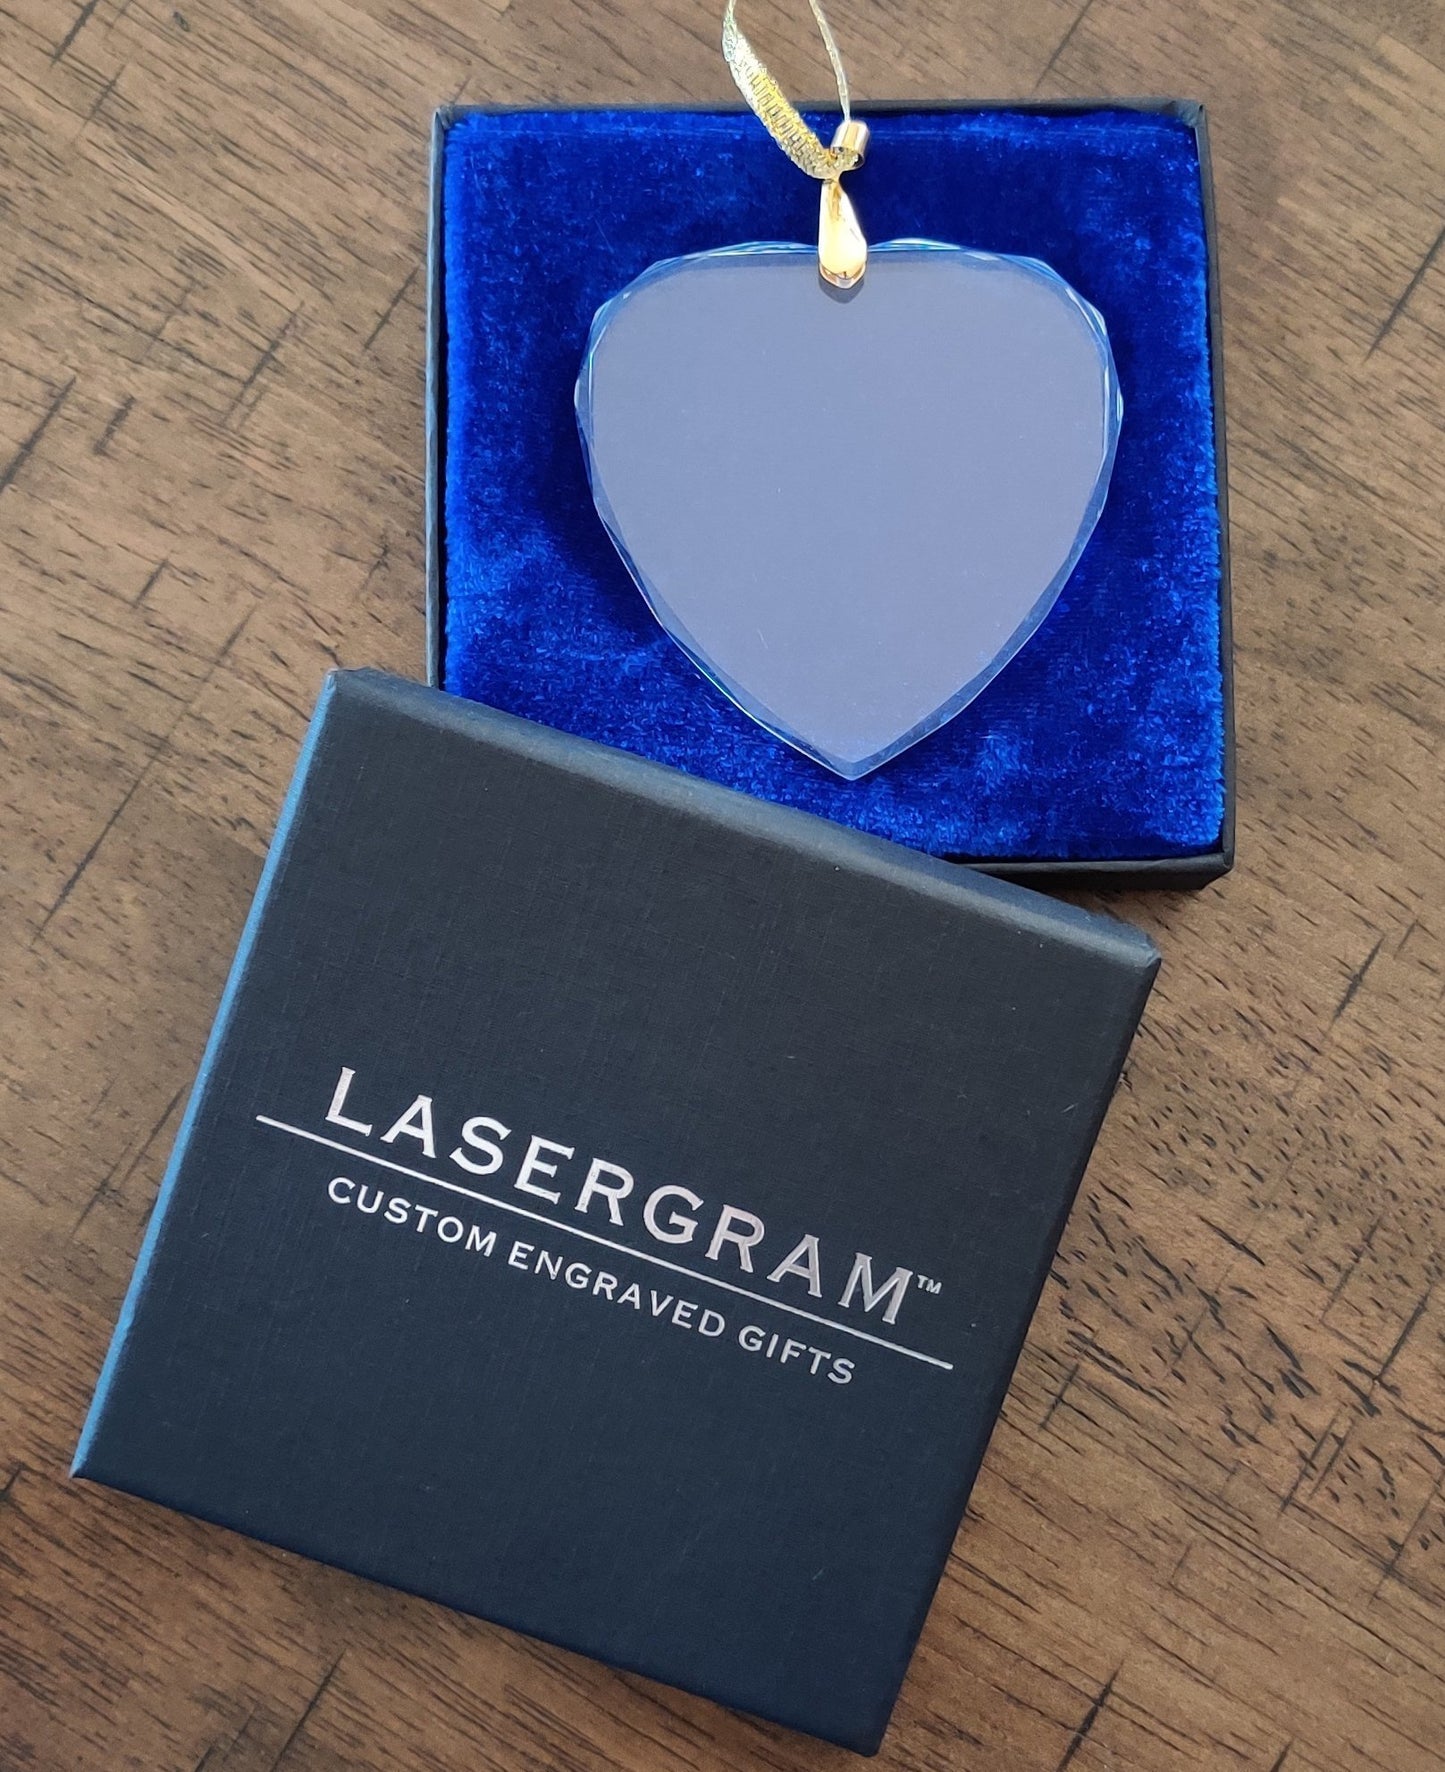 LaserGram Christmas Ornament, Karate Man, Personalized Engraving Included (Heart Shape)